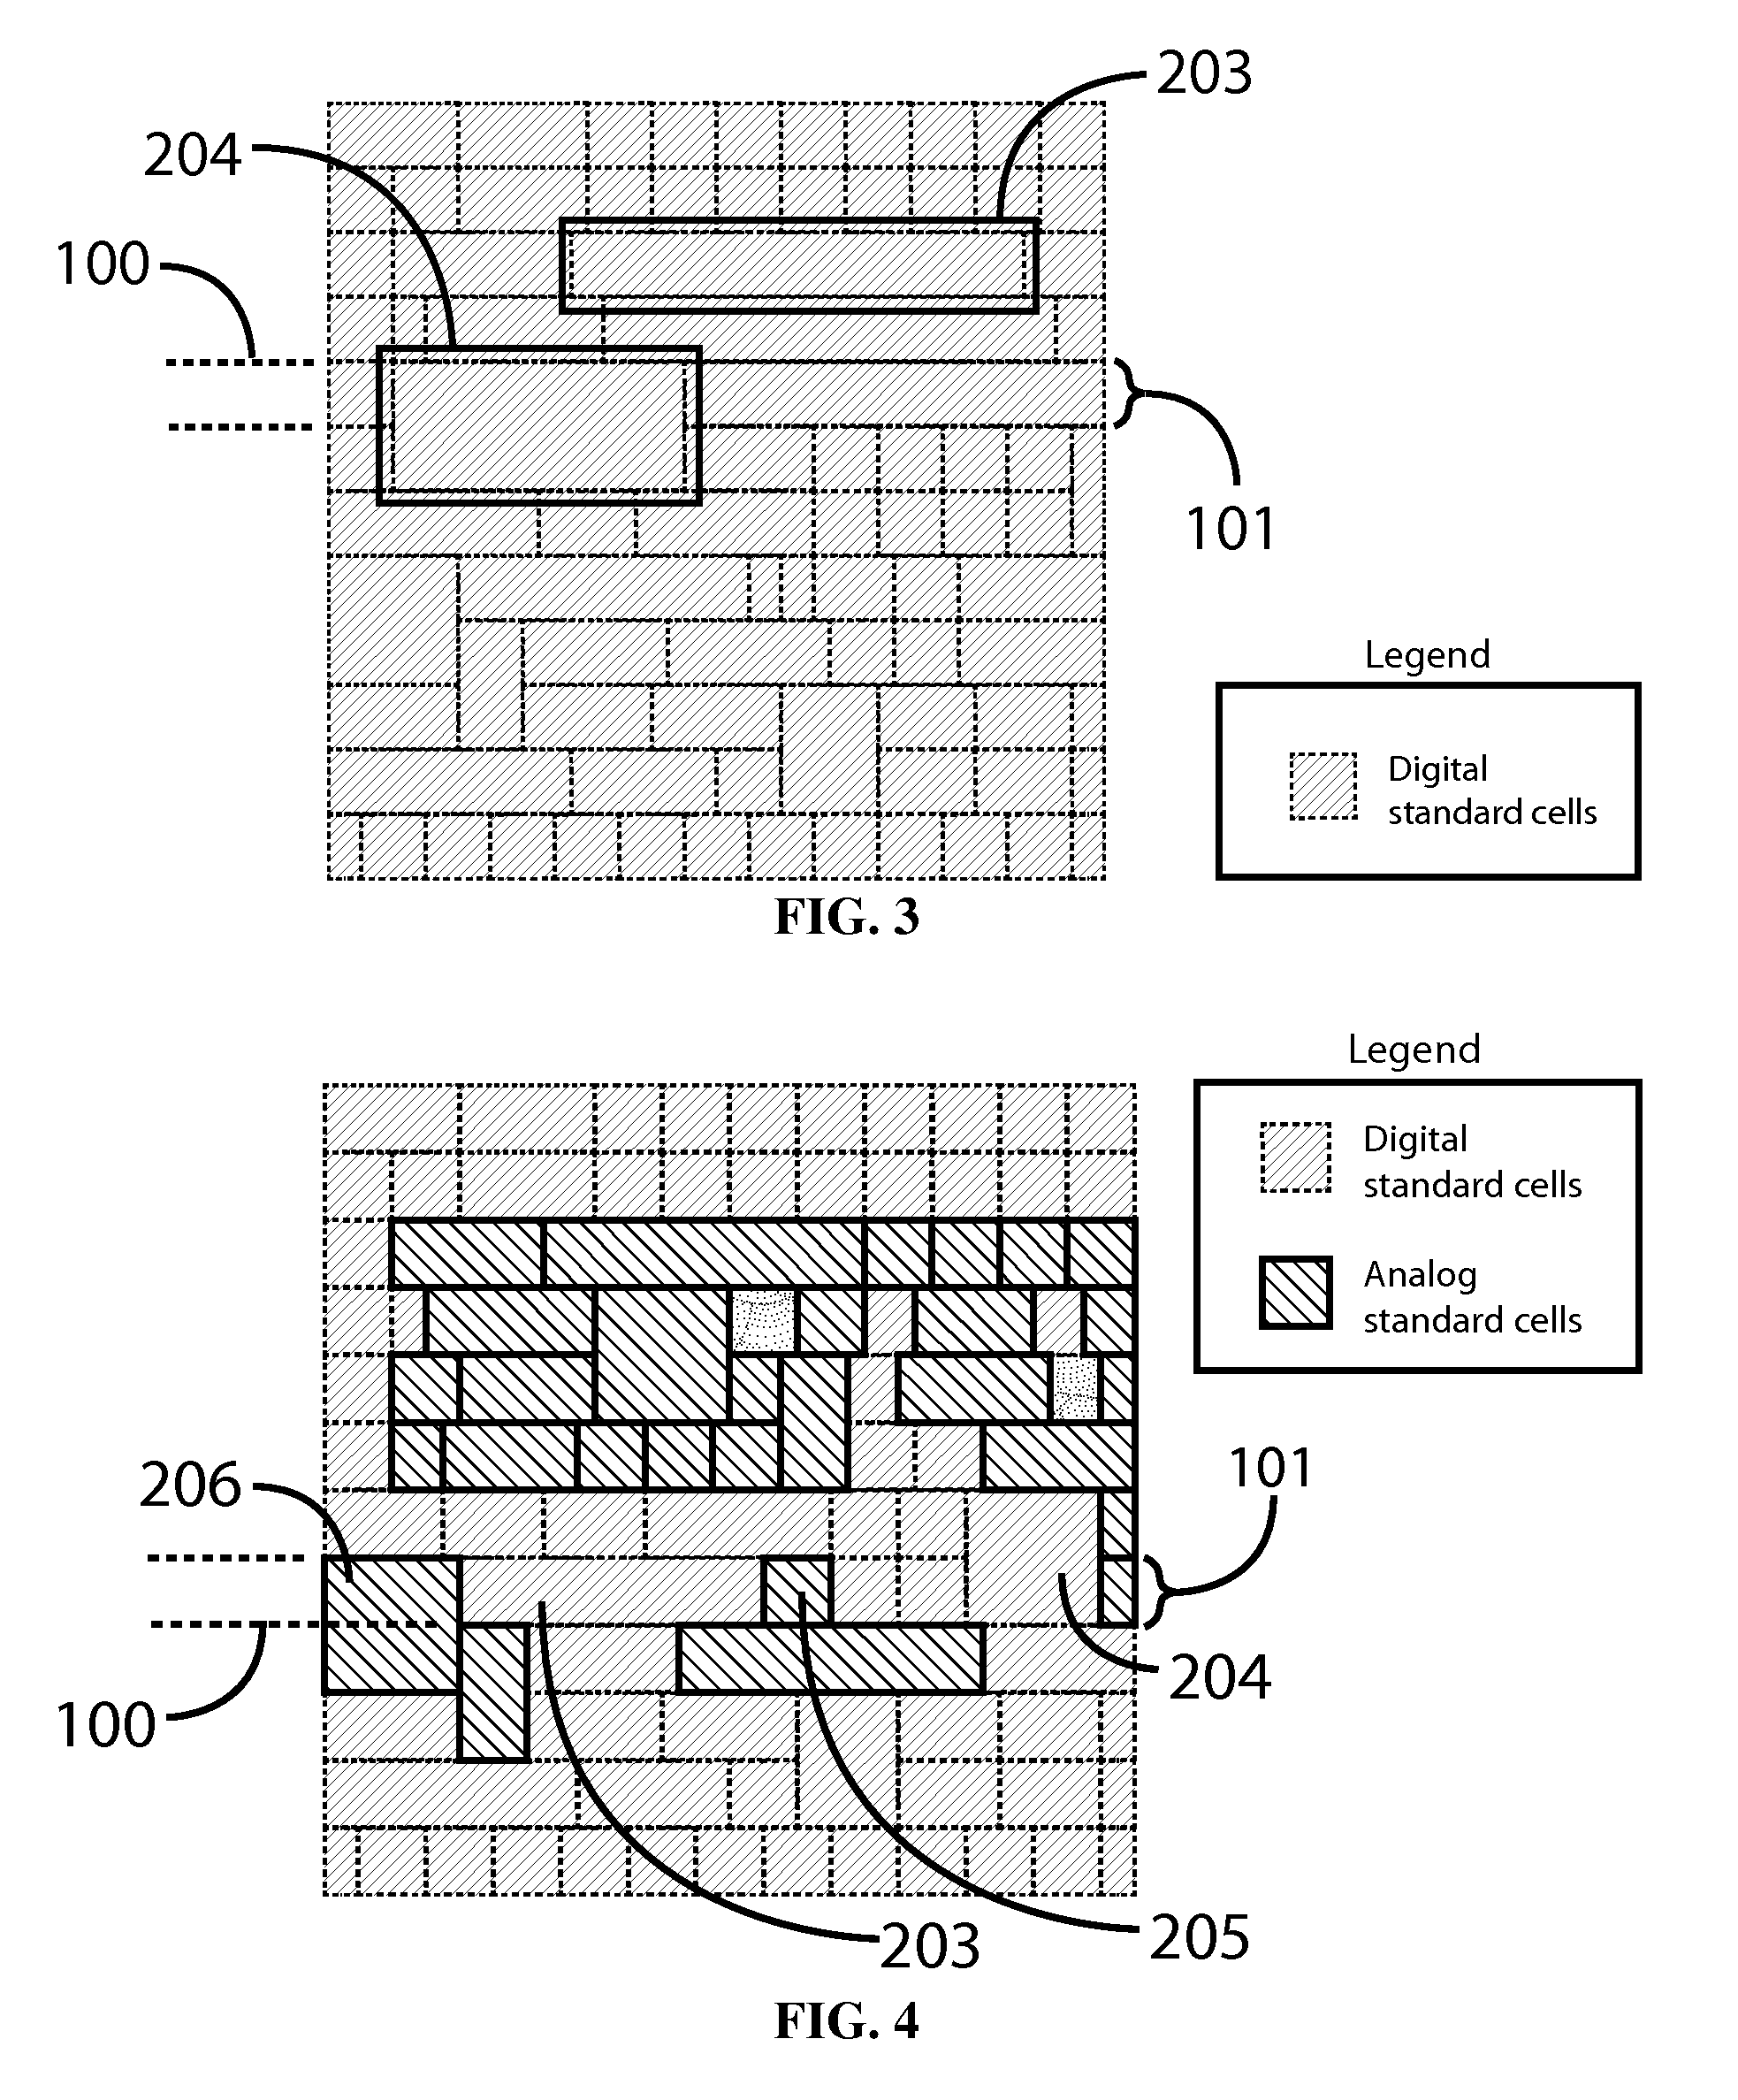 Row based analog standard cell layout design and methodology